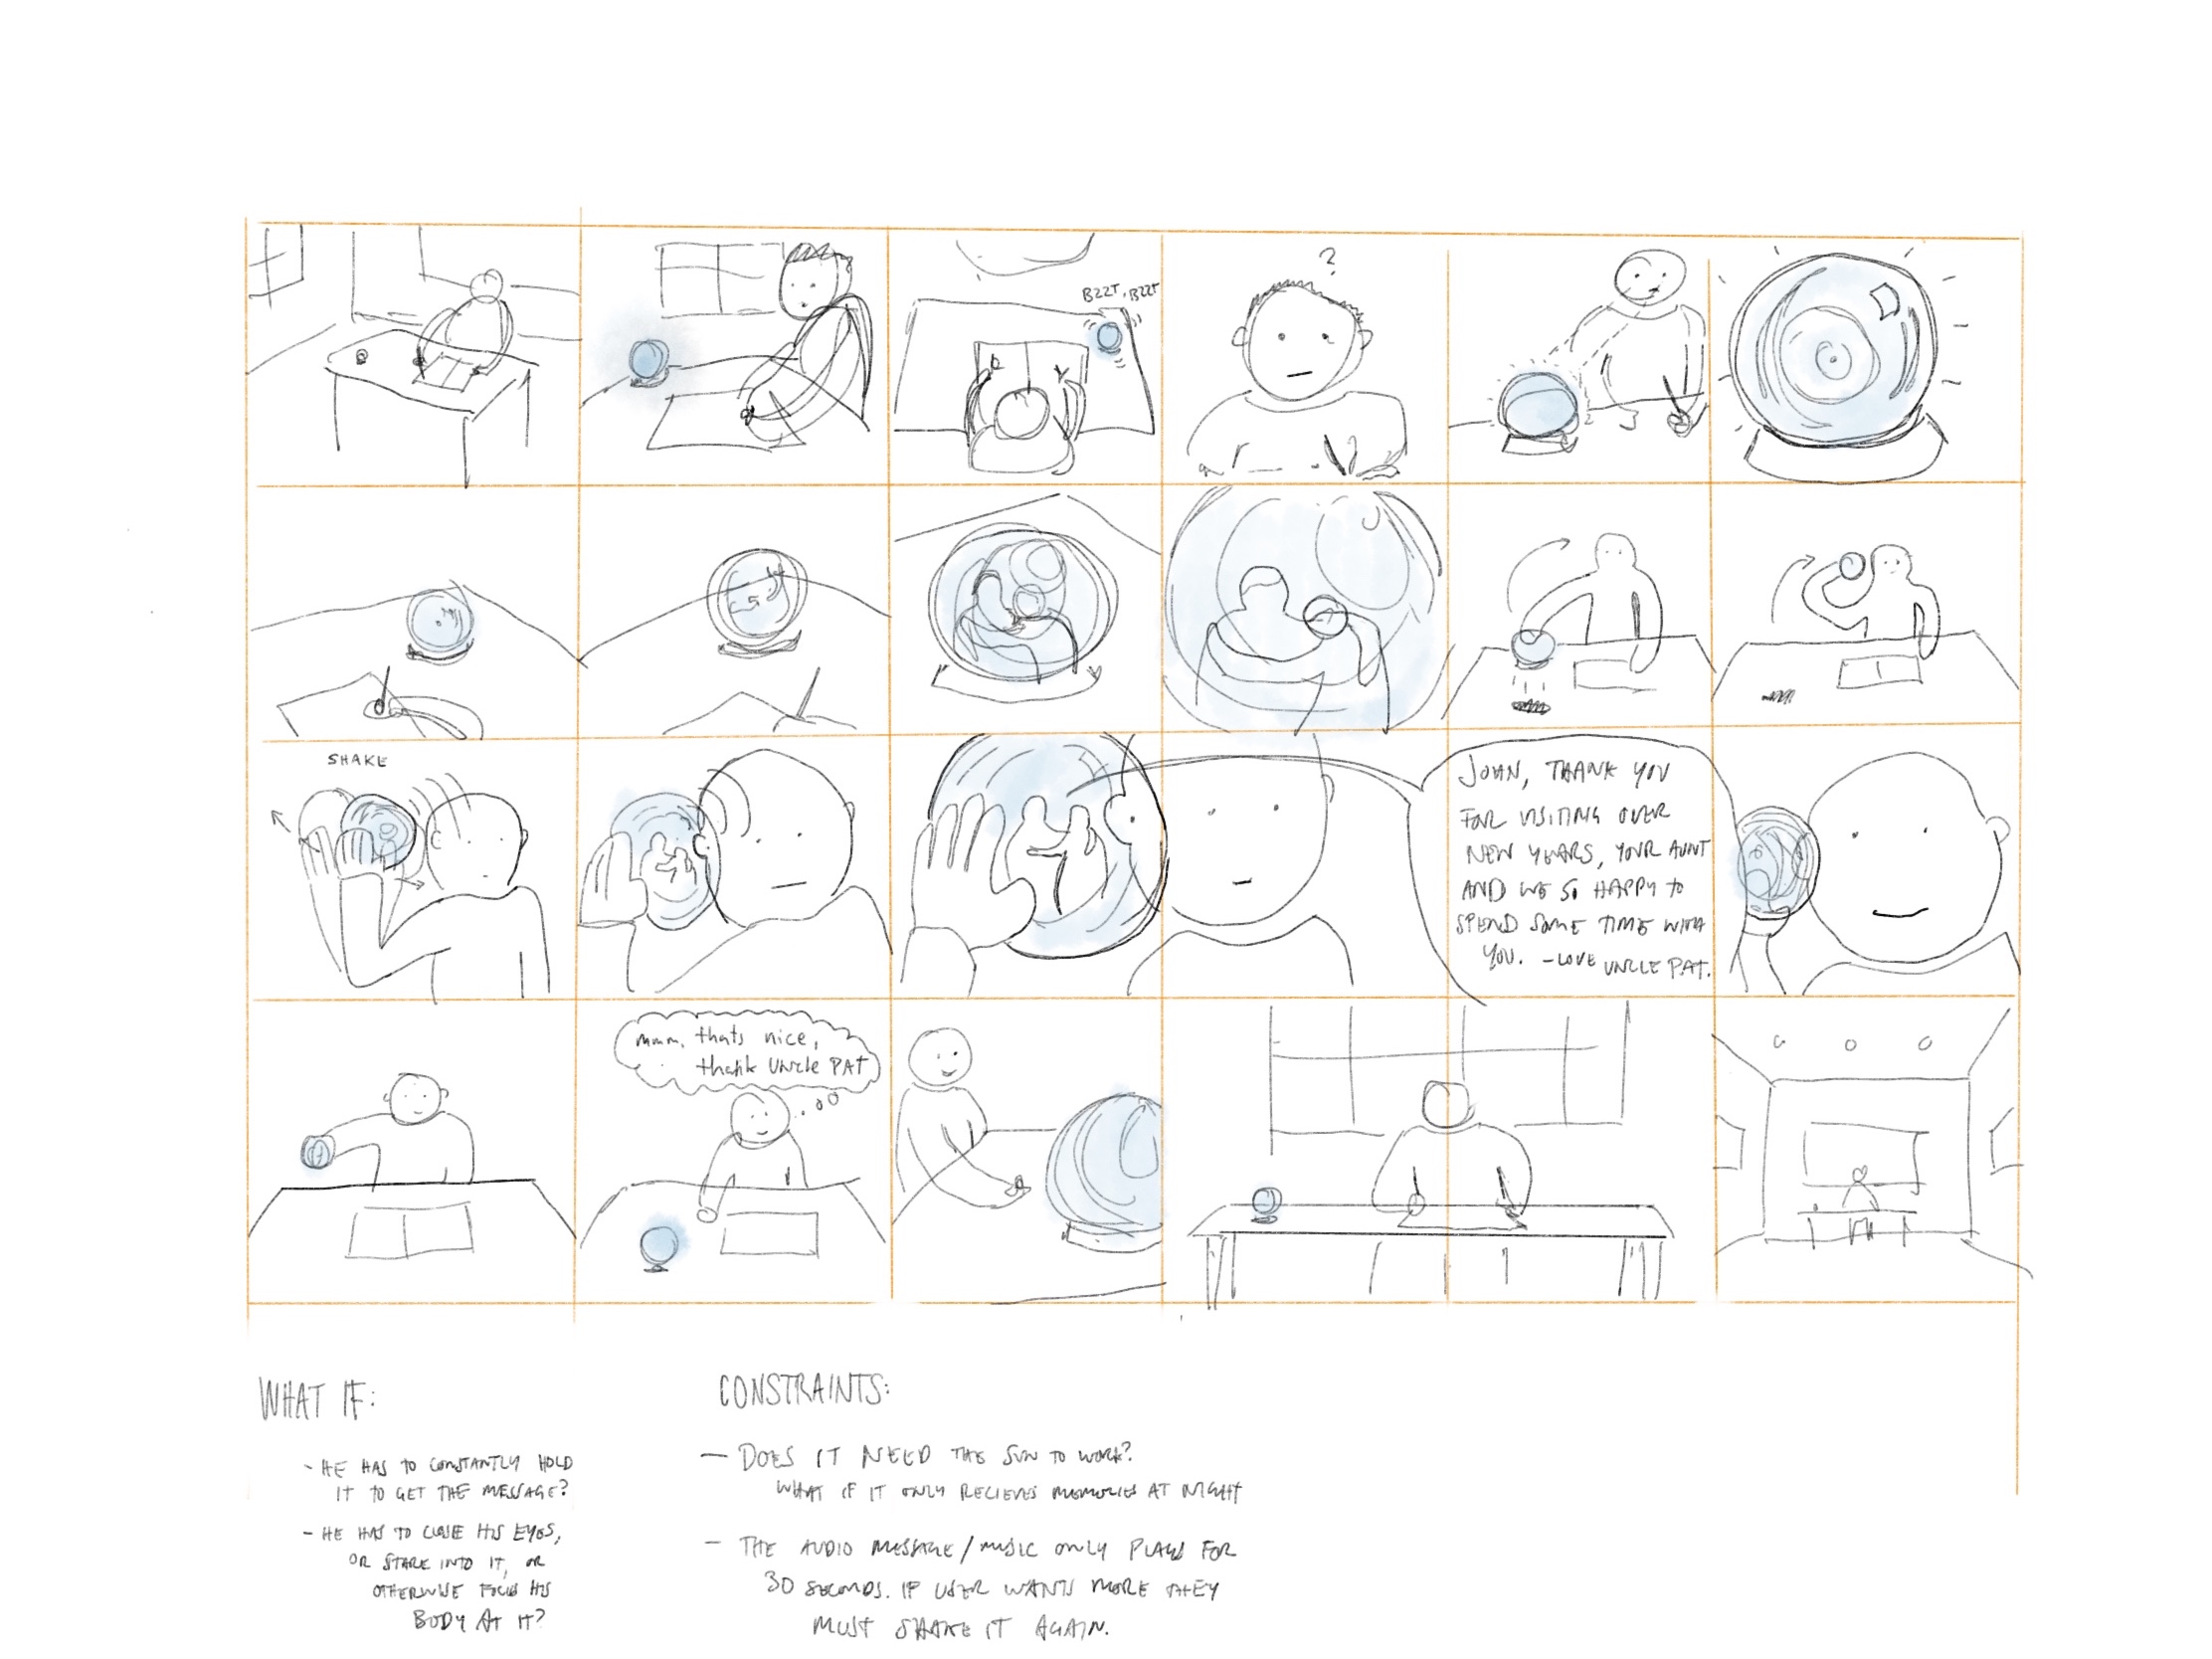 Initial storyboard sketches